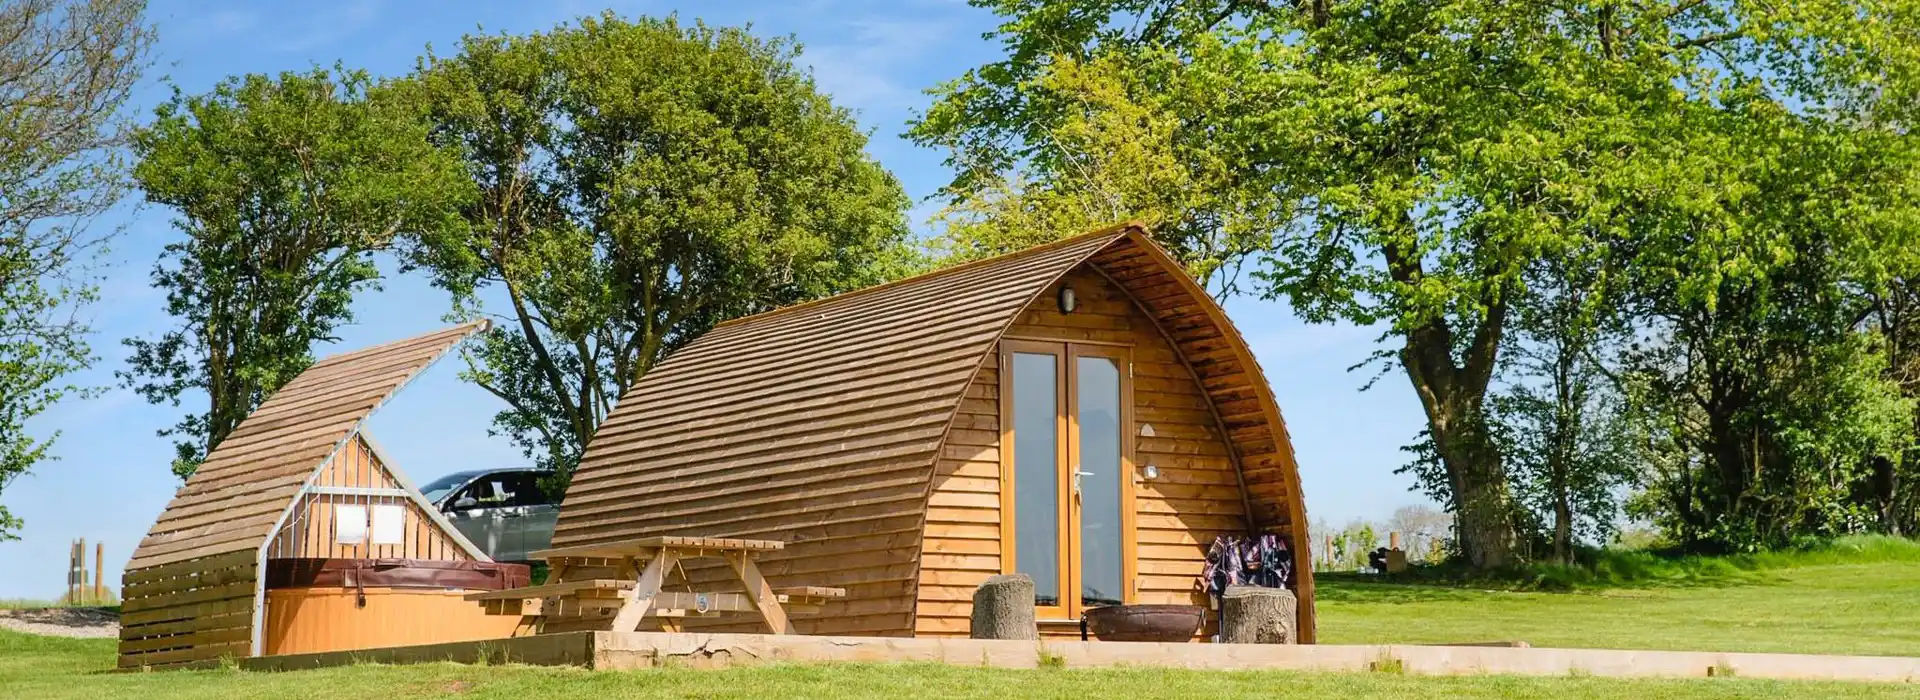 Glamping pods with hot tubs in the North East